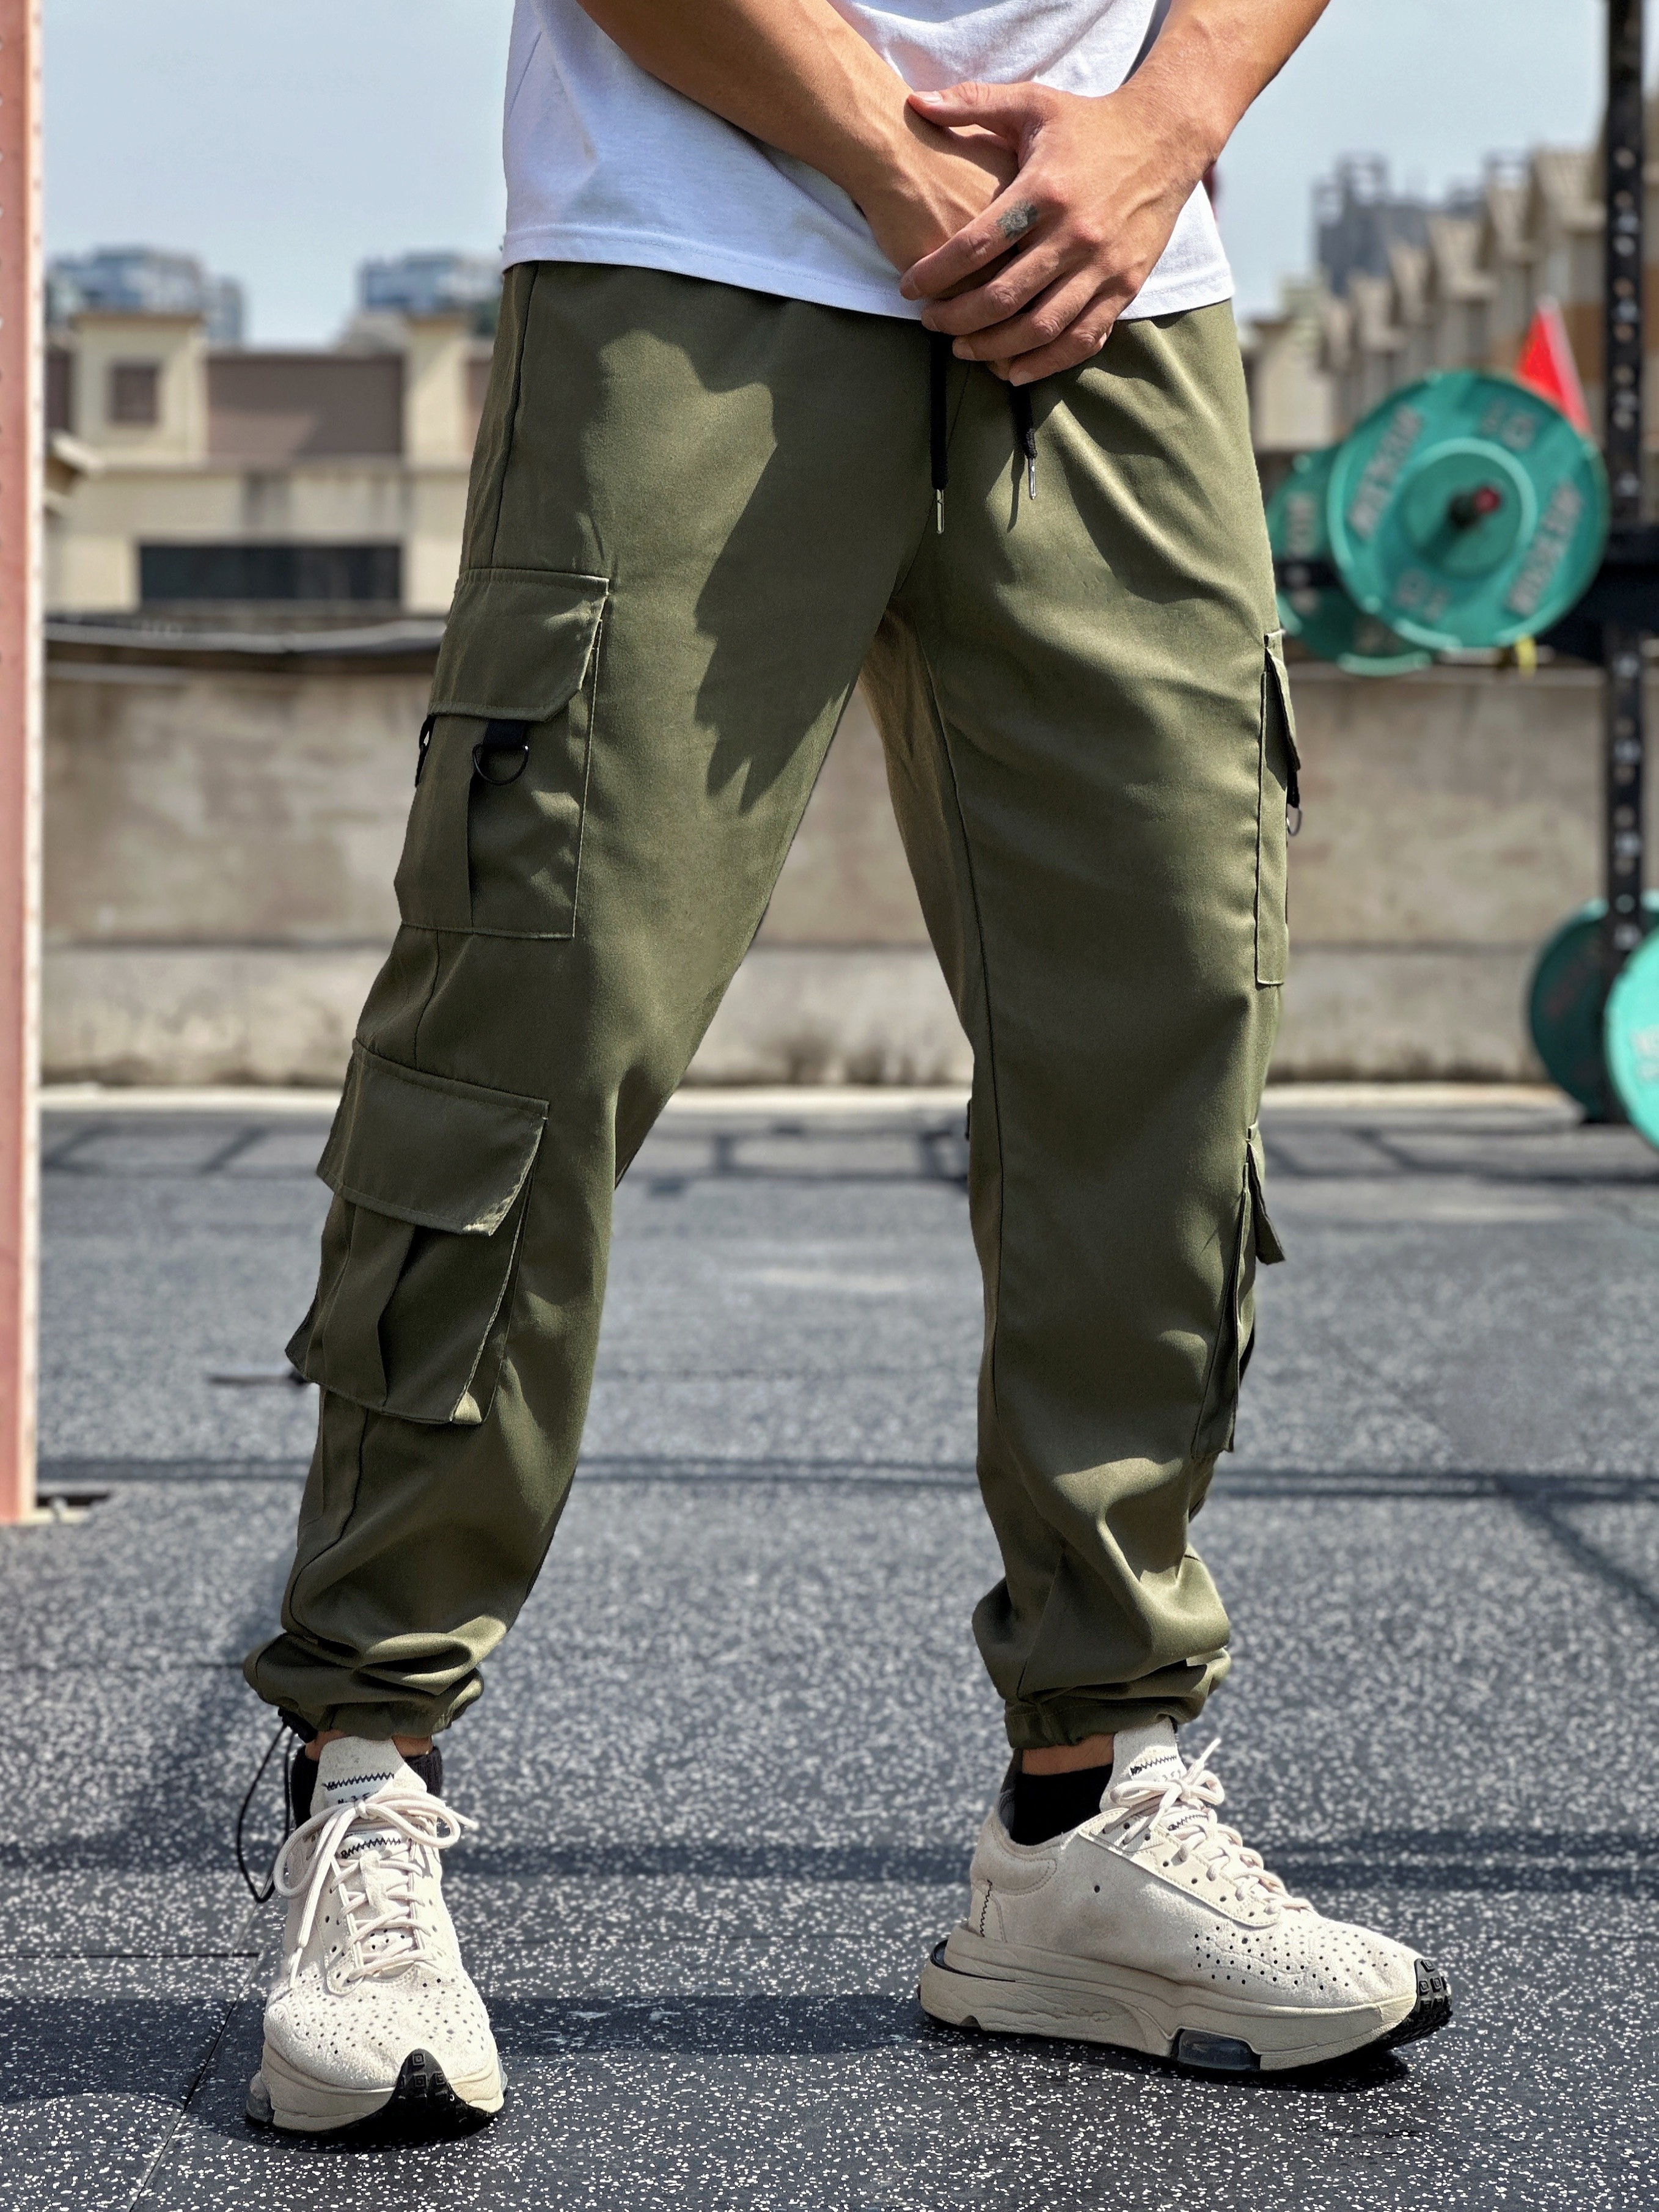 Green & Olive Pants  Pants outfit men, Mens outfits, Green pants